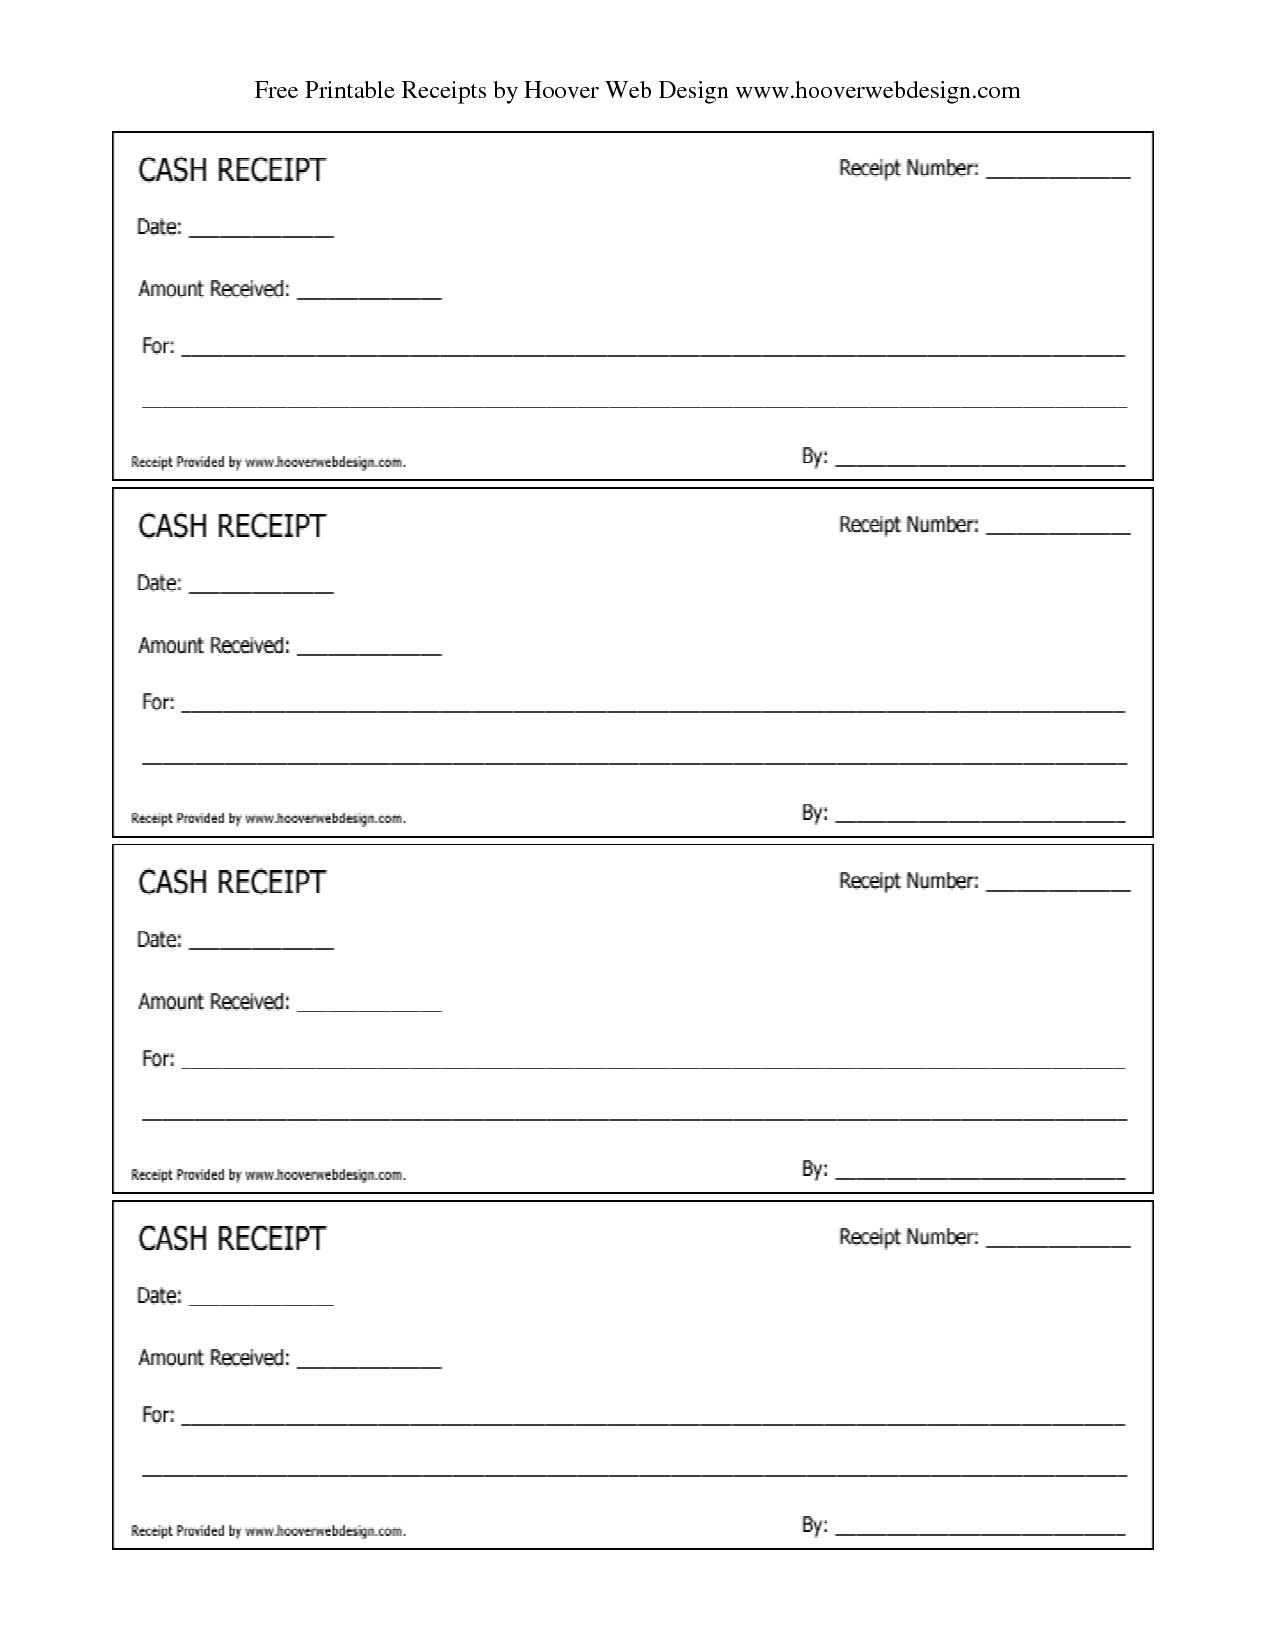 7-best-images-of-free-printable-play-receipts-free-receipt-template